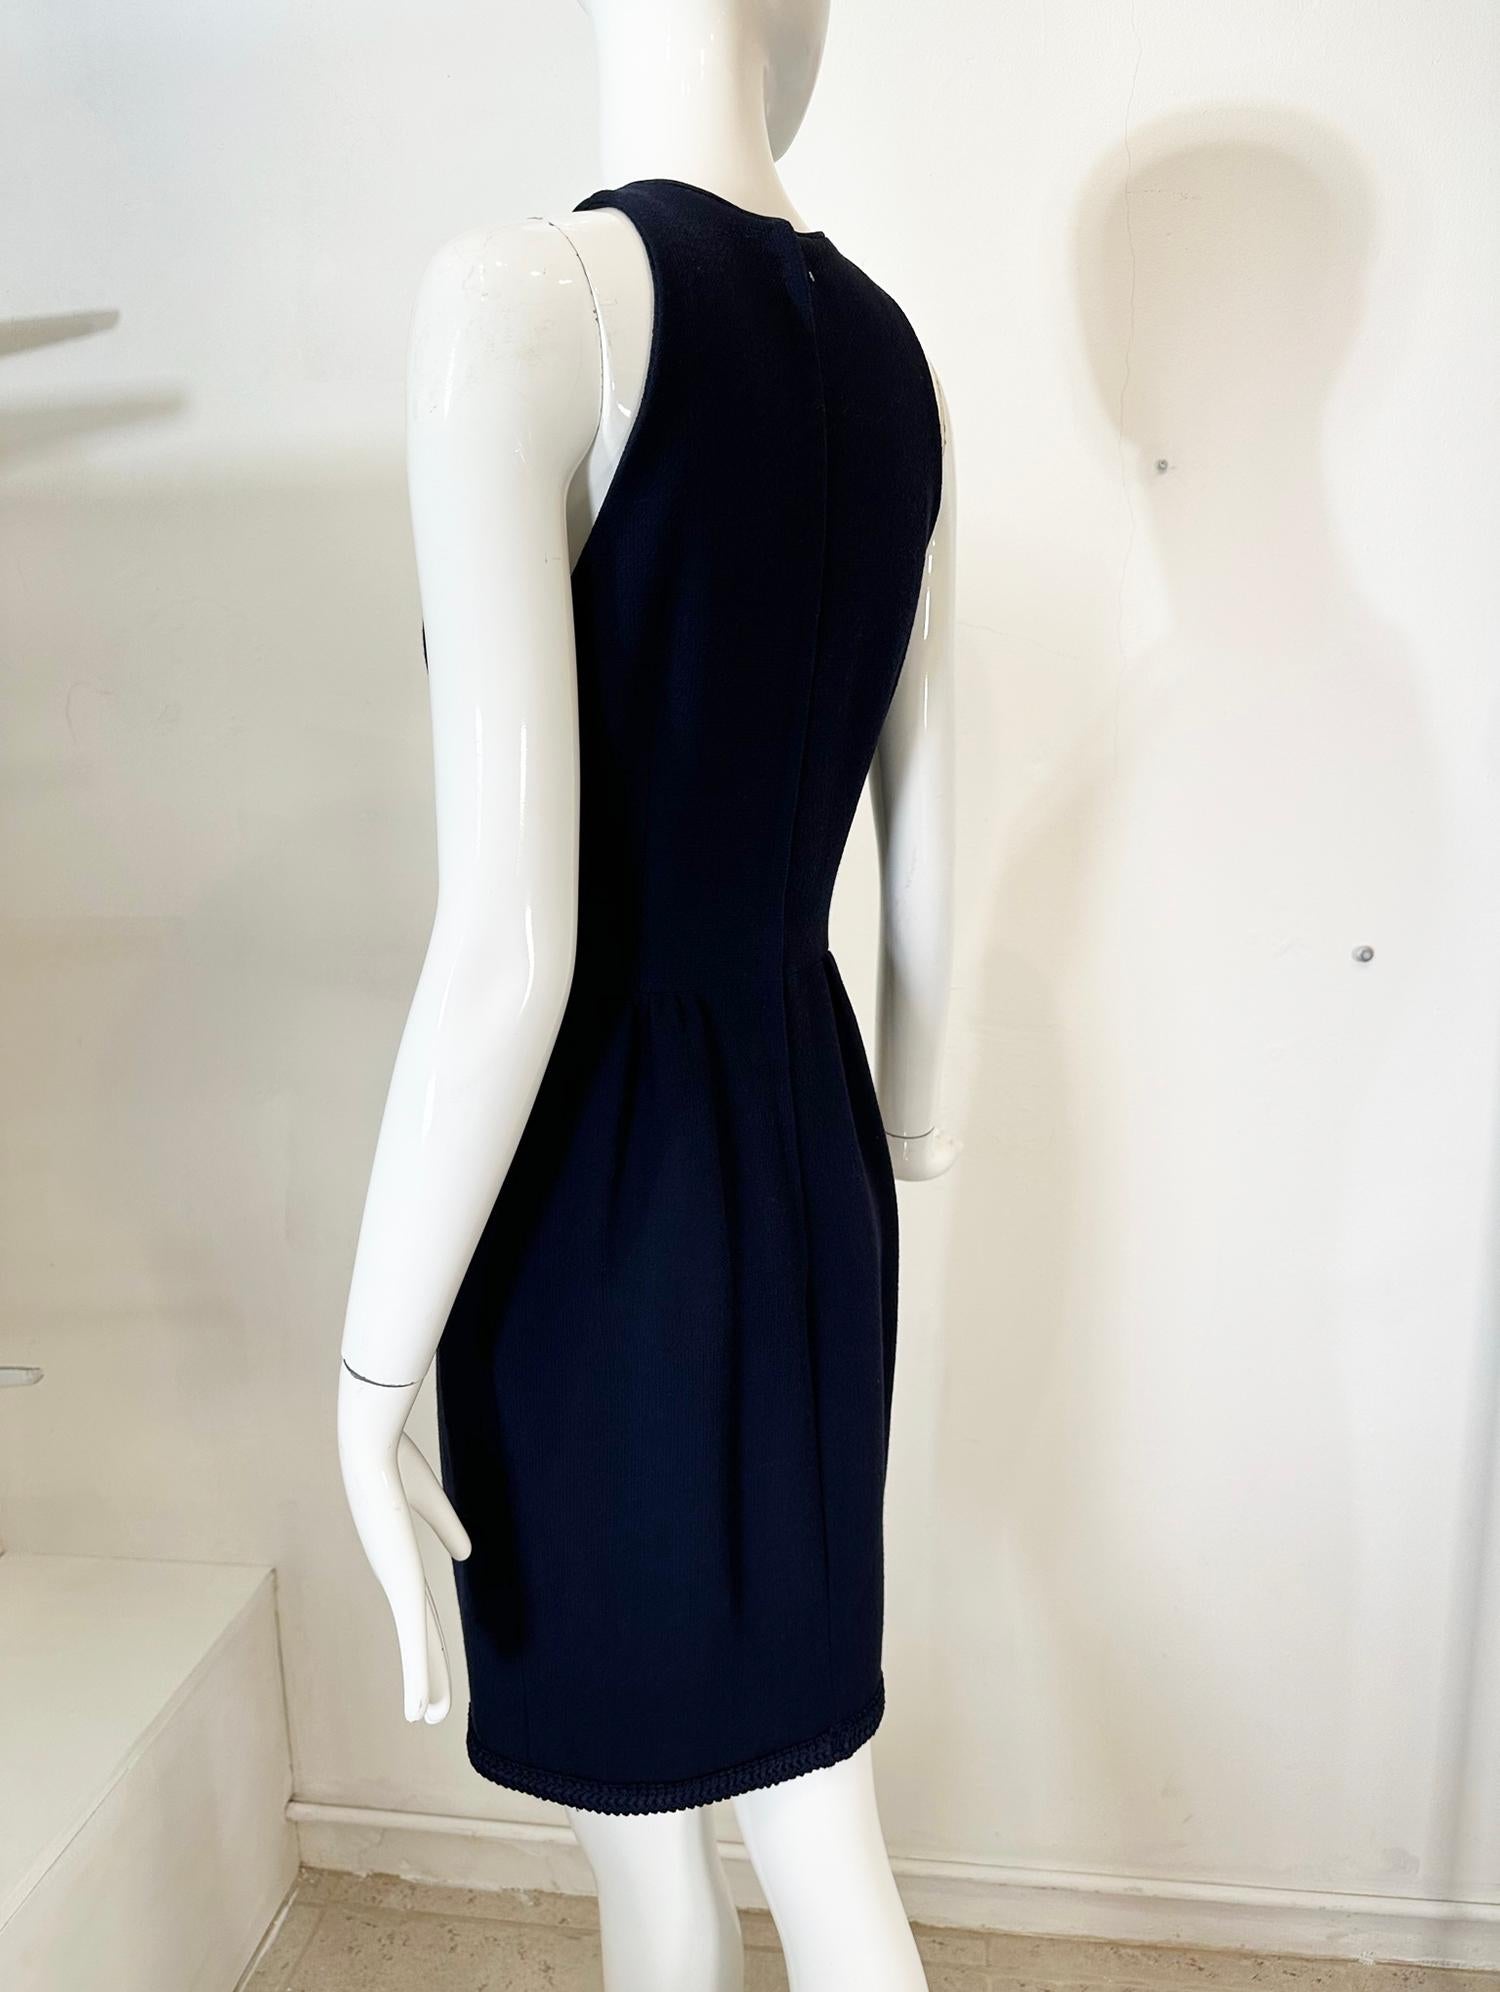 Irene Galitzine Couture Navy Blue Racer Neck Fitted Sheath Braid Trim Dress 1960 In Good Condition For Sale In West Palm Beach, FL